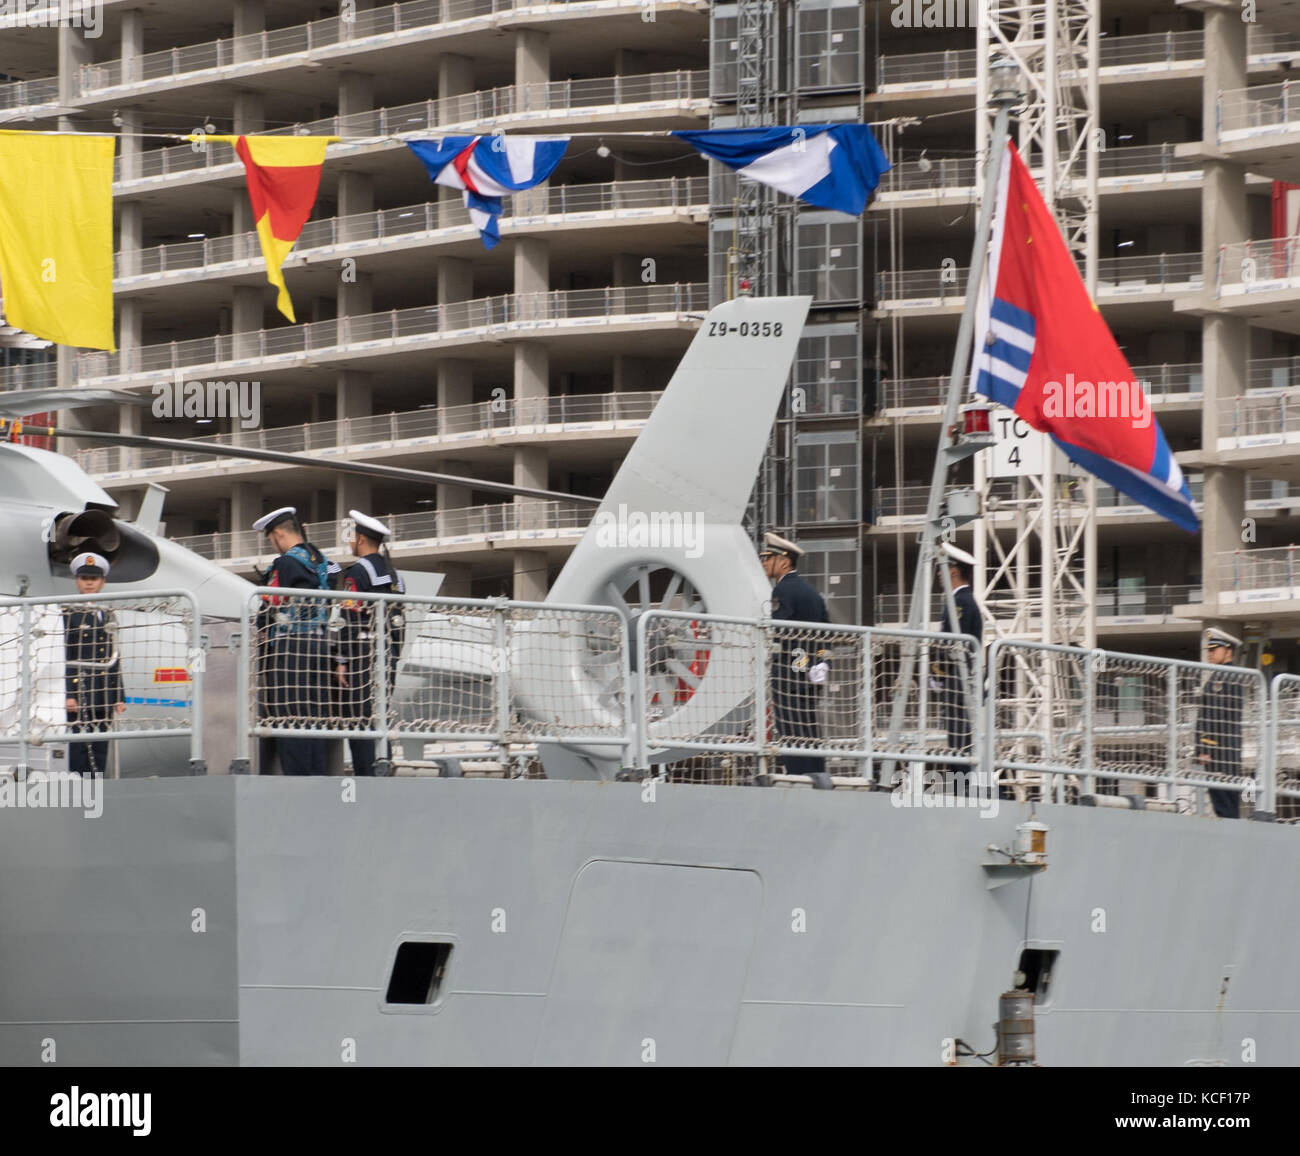 London 4th October 2017 Chinese warships – Type 54A Frigates Huanggang and Yangzhou pay a good will visit to London. Stock Photo